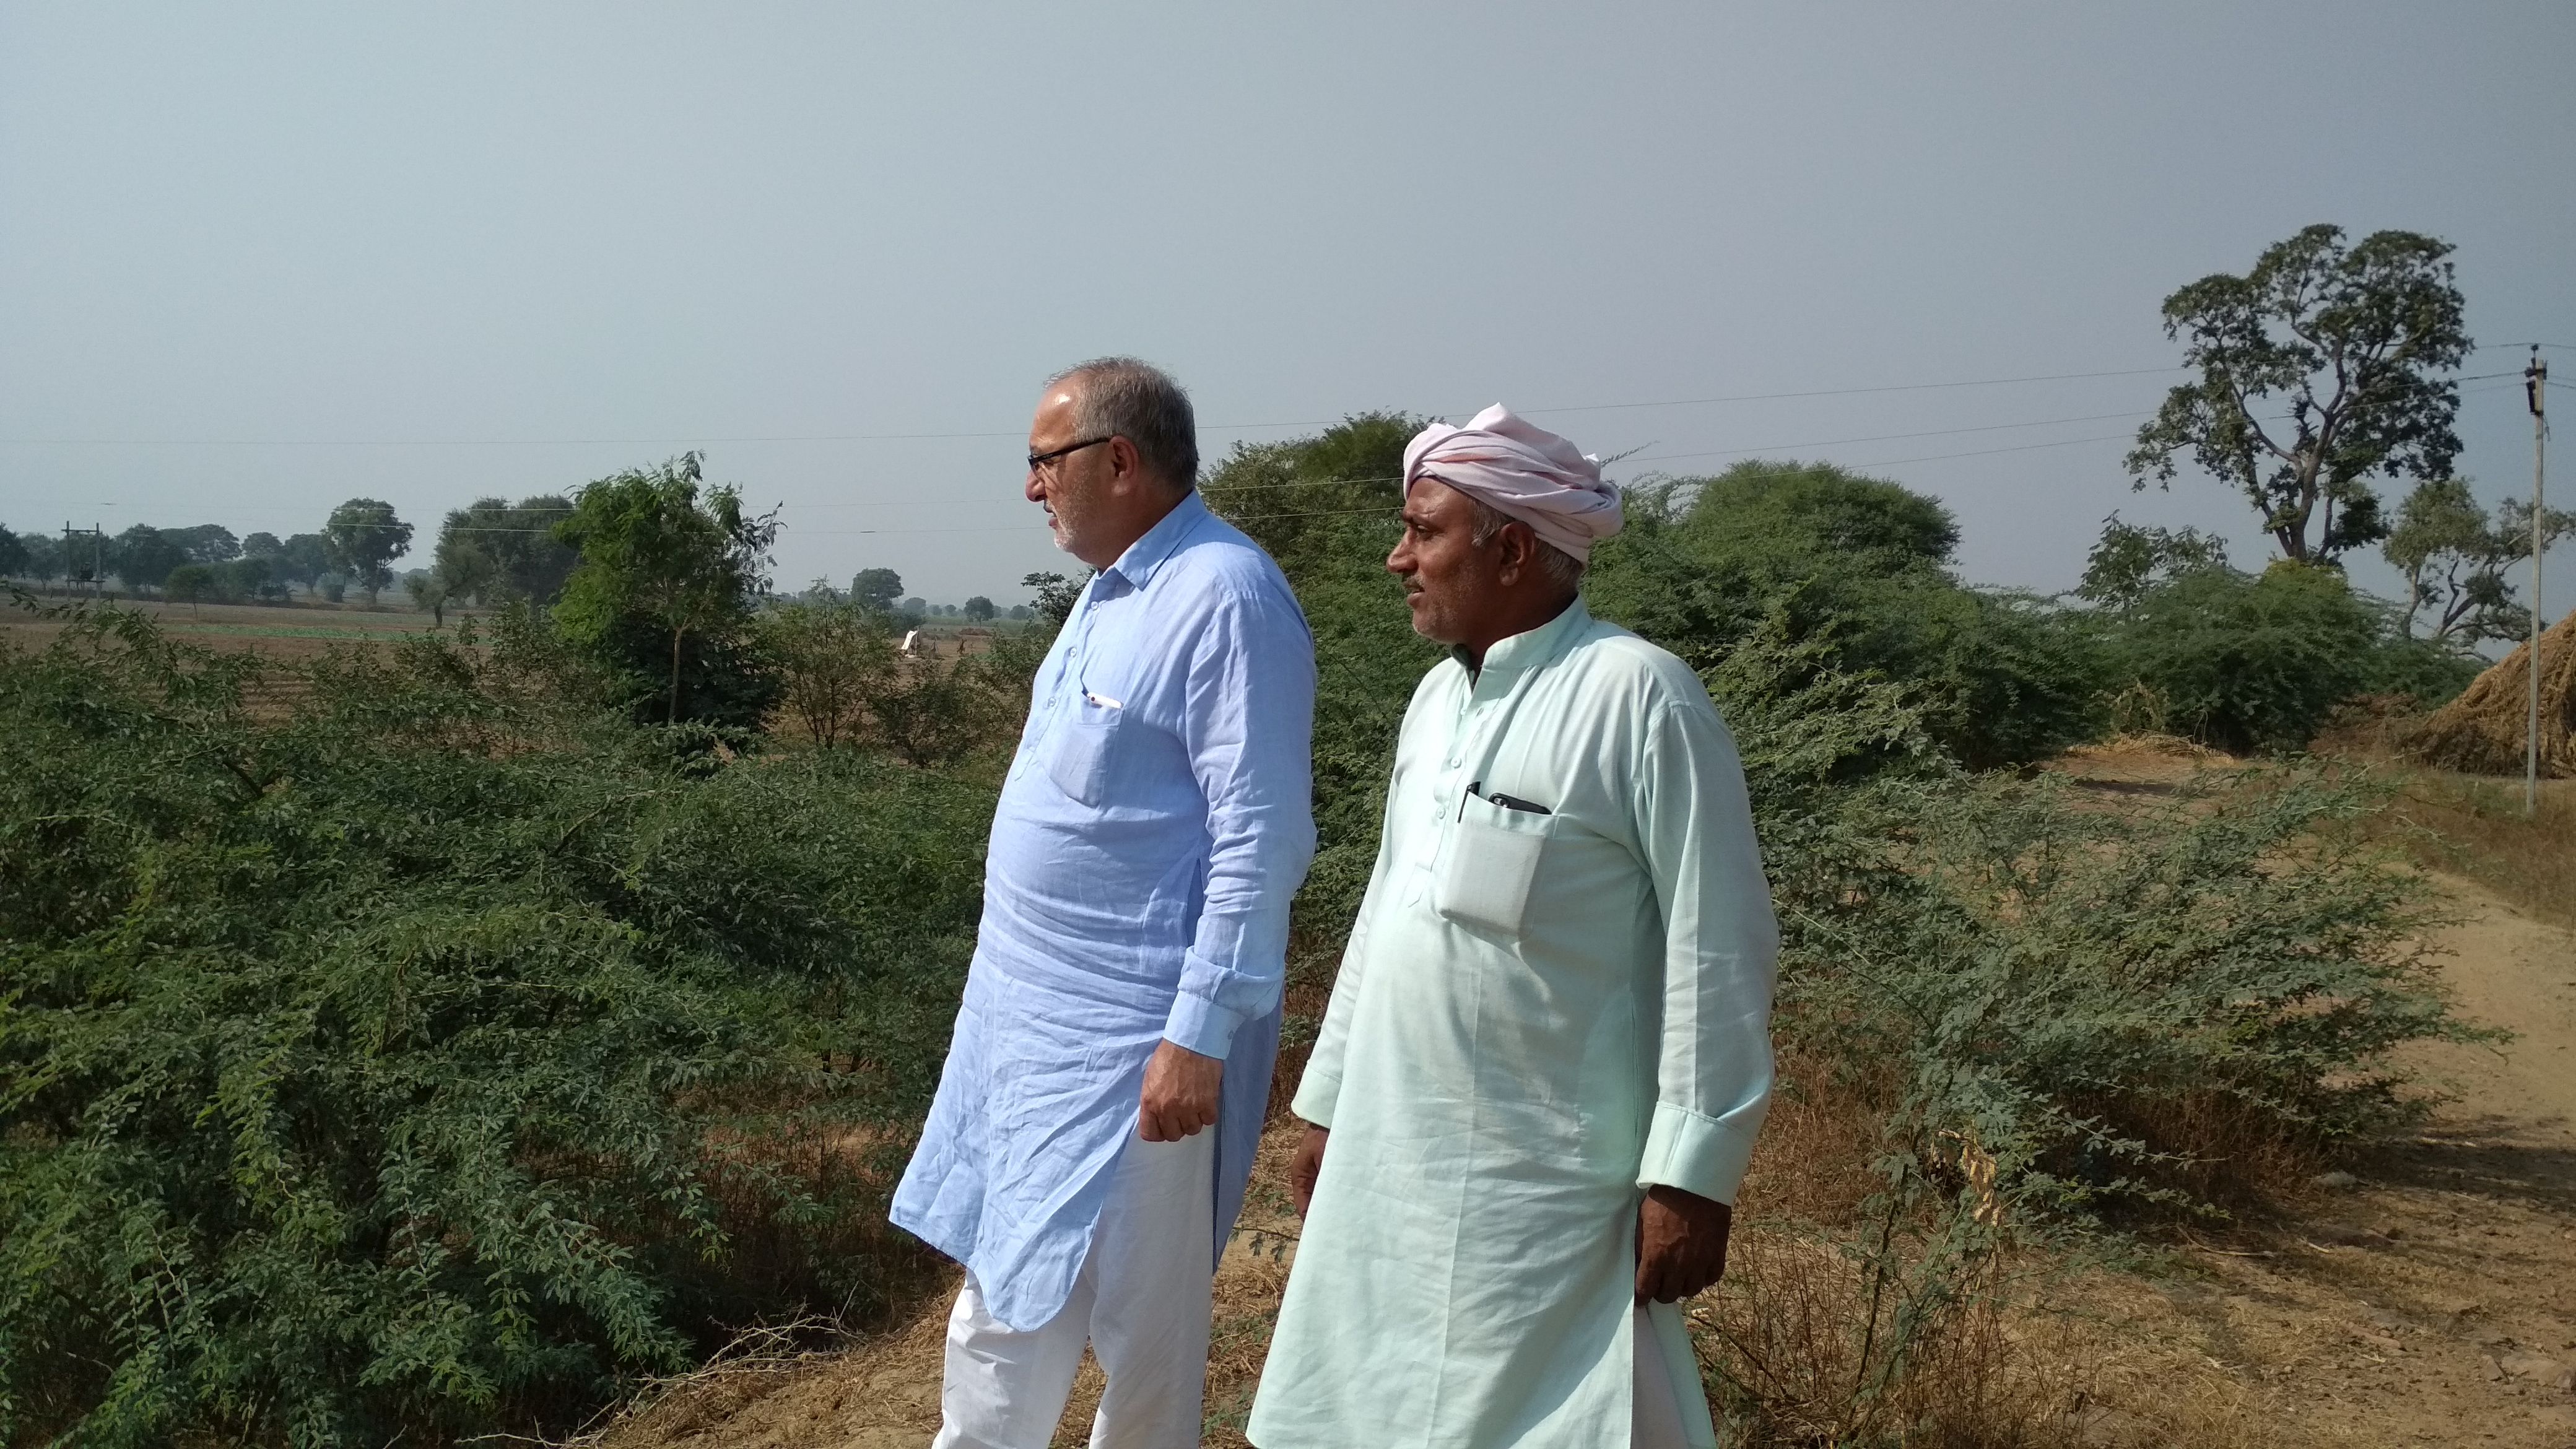 Sikri irrigation system received waters from a canal system and fed the traditional earthen dams or johads in the area. Lakhvir Singh and Mohar Singh Gujjar now lead a struggle to get waters for revival of this irrigation system. (Image: India Water Portal)